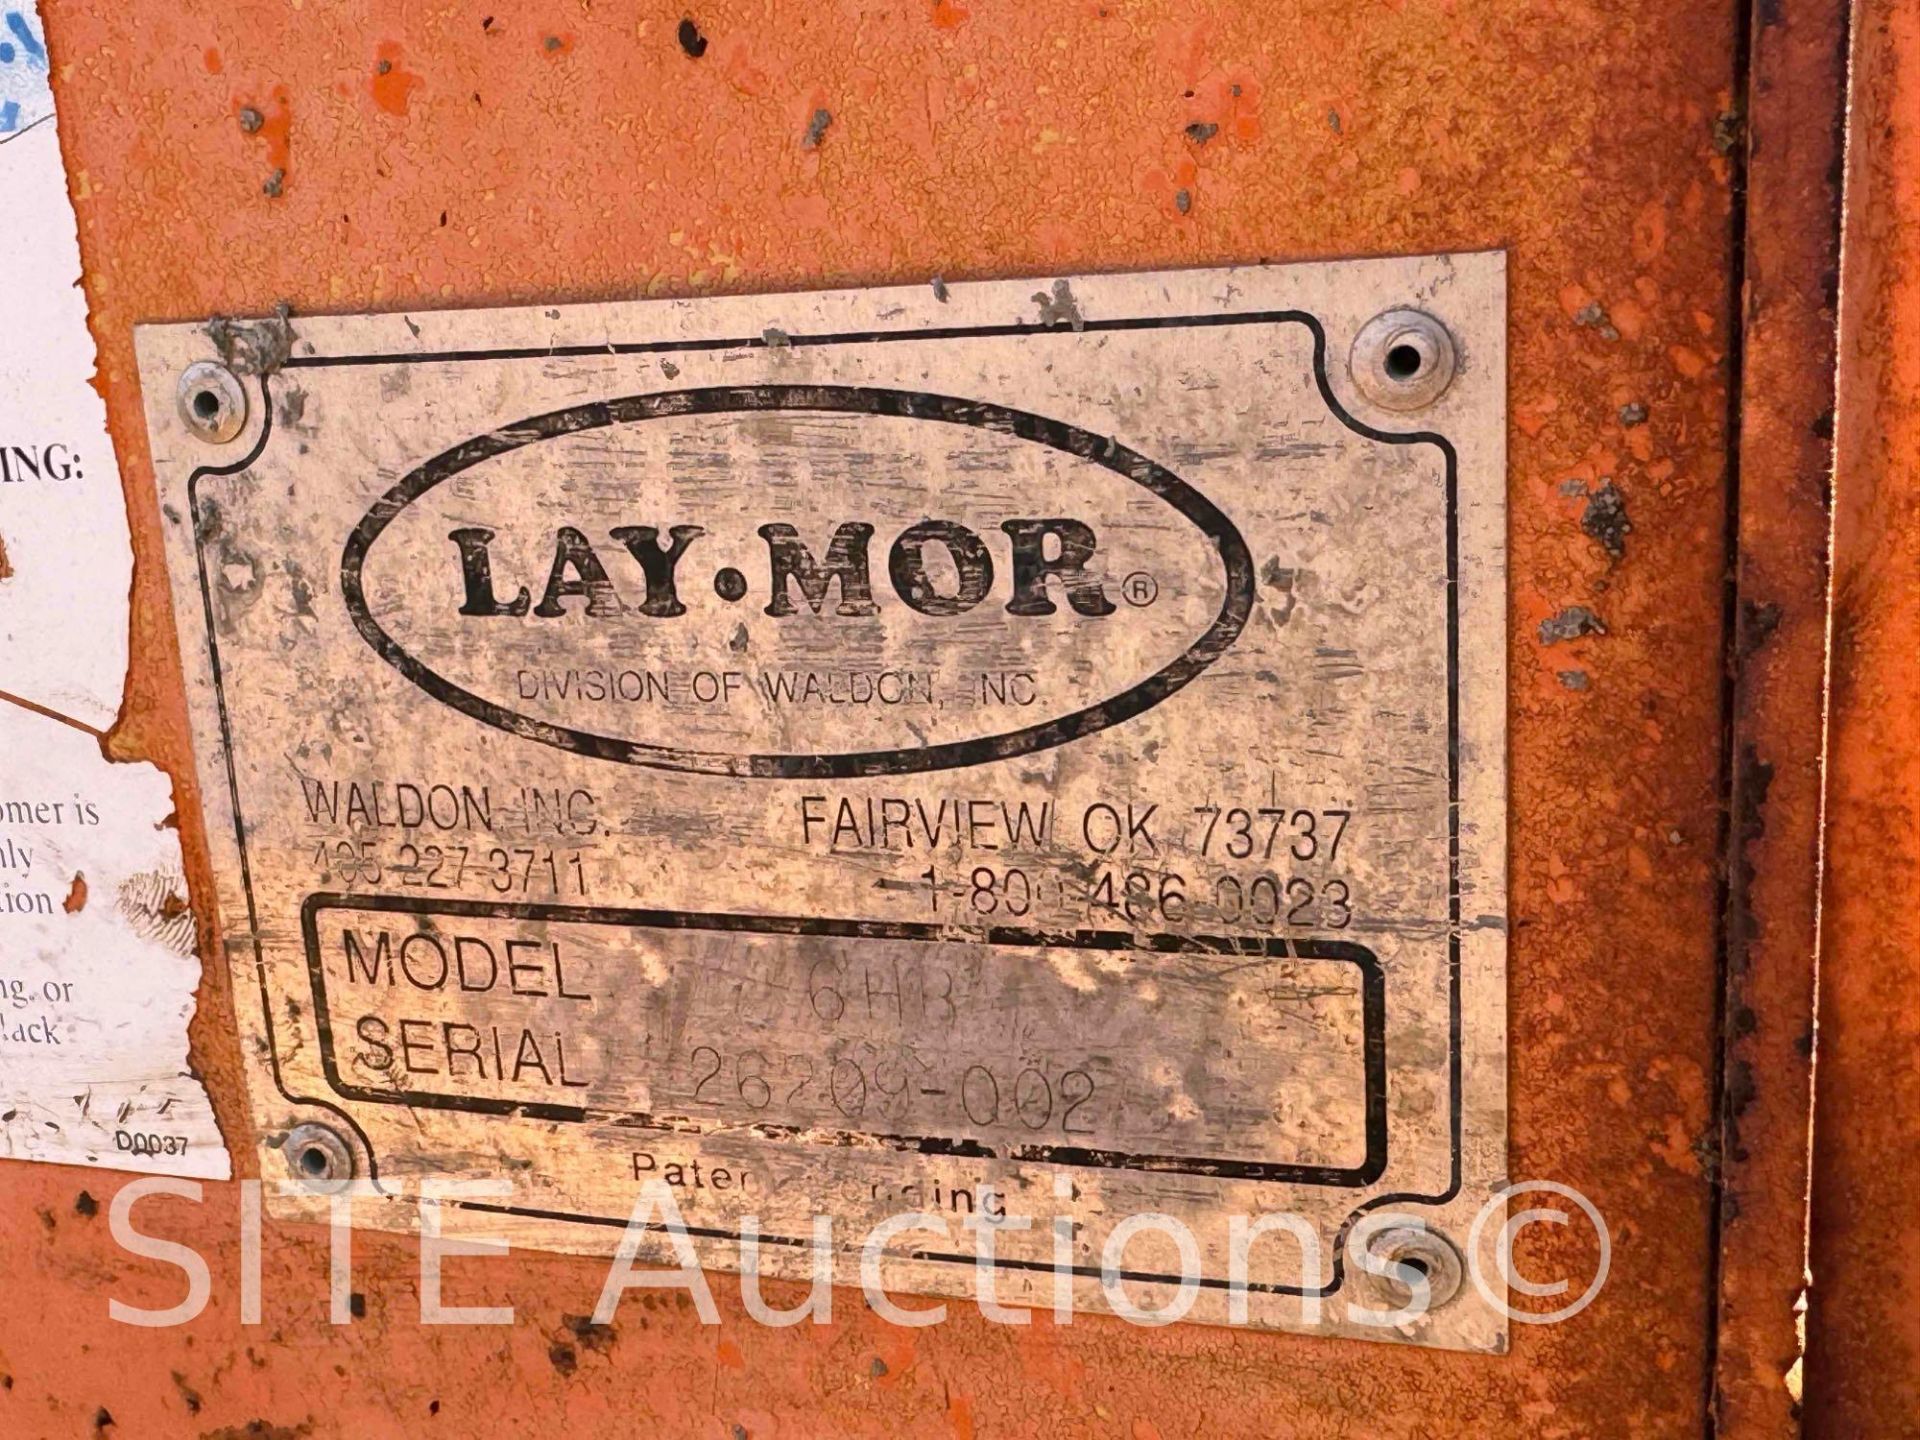 Lay-Mor 6HB Sweeper - Image 8 of 18